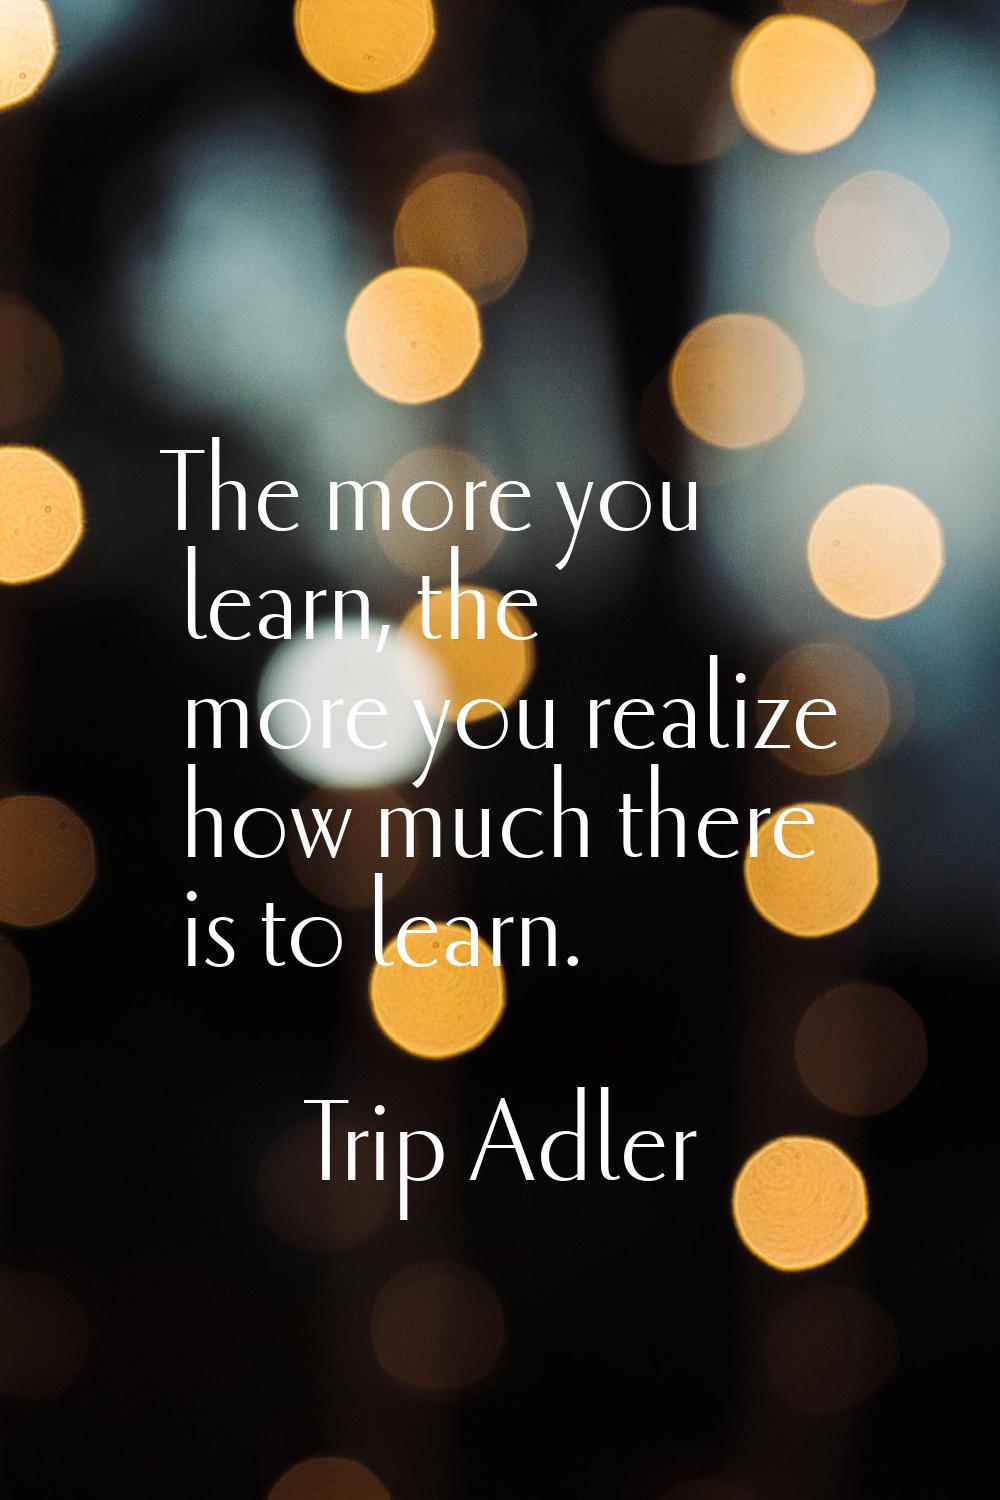 The more you learn, the more you realize how much there is to learn.